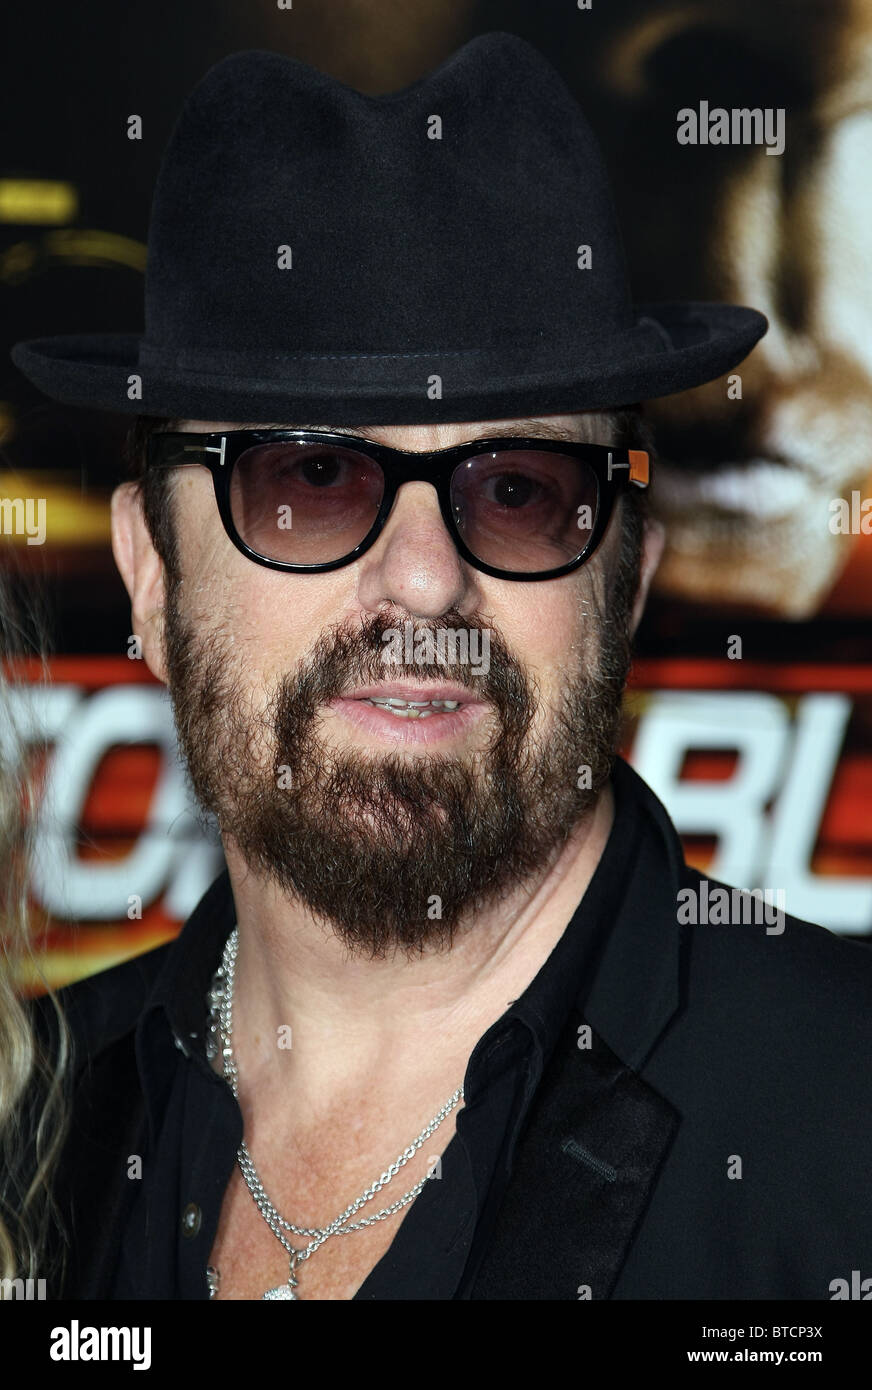 DAVE STEWART UNSTOPPABLE FILM PREMIERE LOS ANGELES CALIFORNIA USA 26 October 2010 Stock Photo